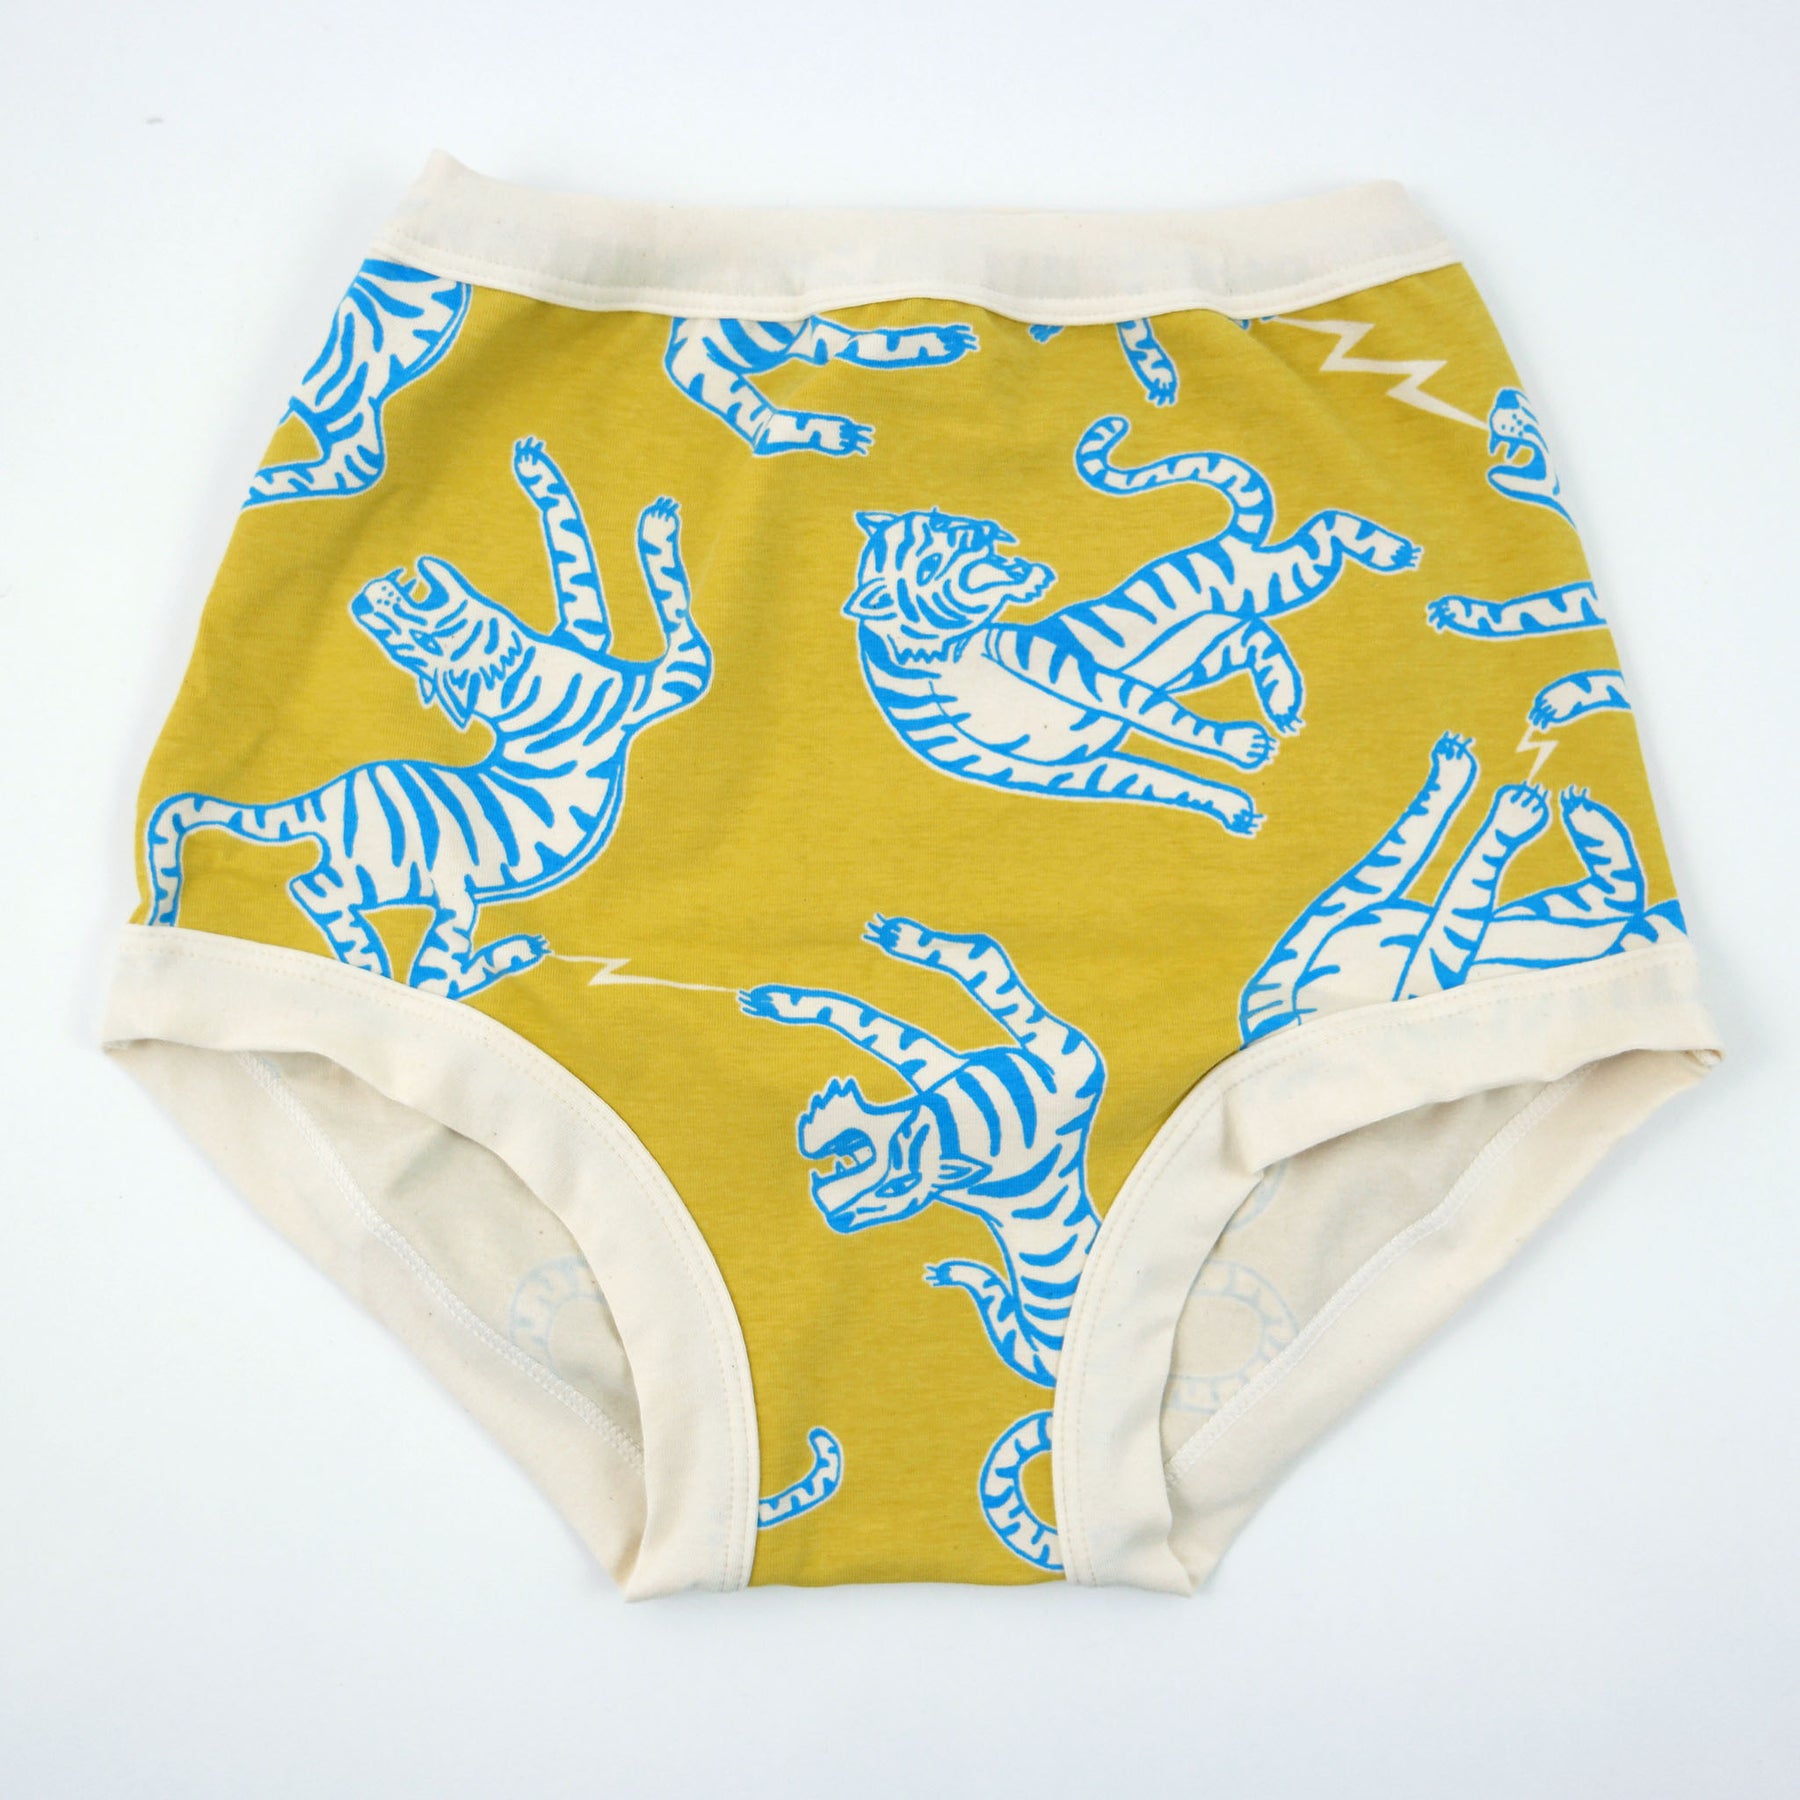 Thunderpants Sky Rise, Easy Tiger – Velouria Boutique